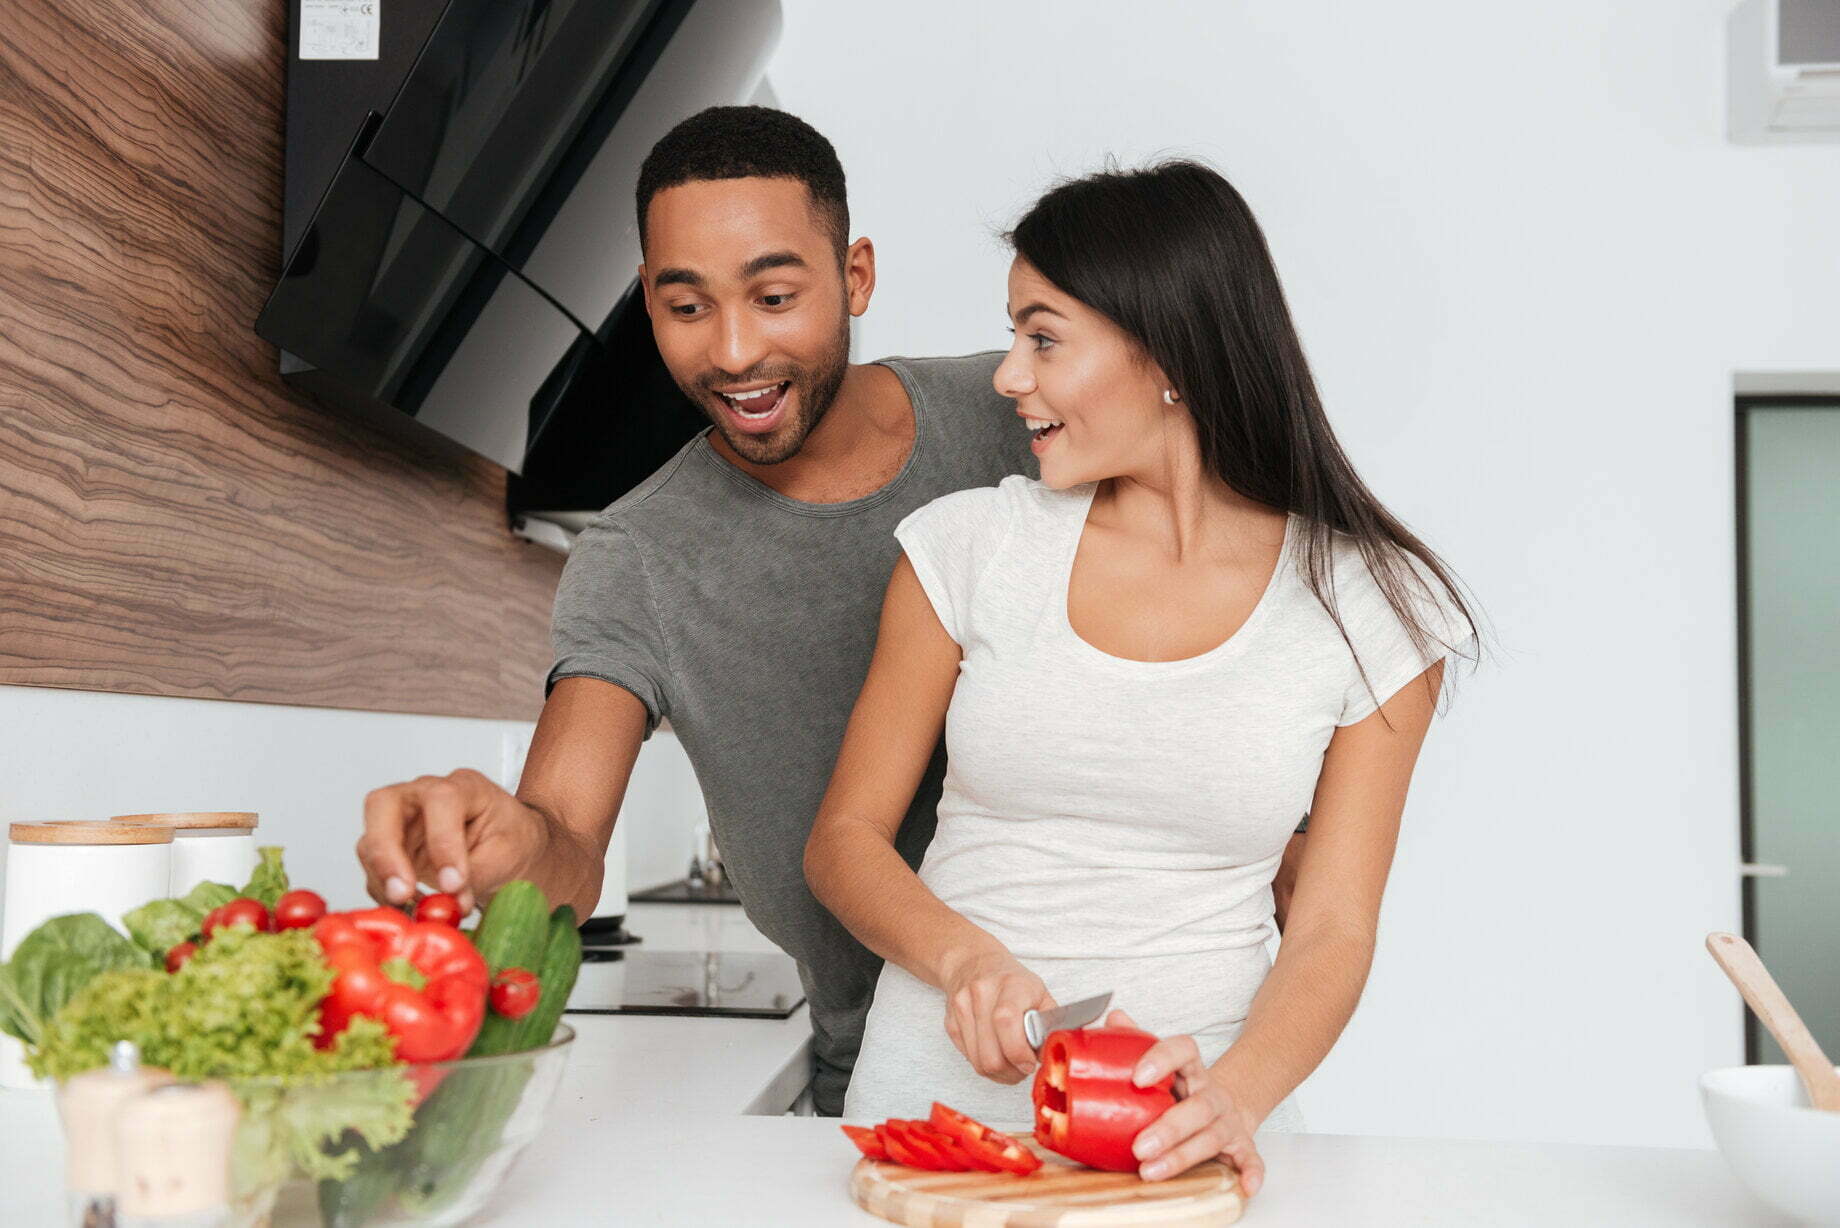 Smiling man takes a veggies from bowl beside woman cutting red capsicum